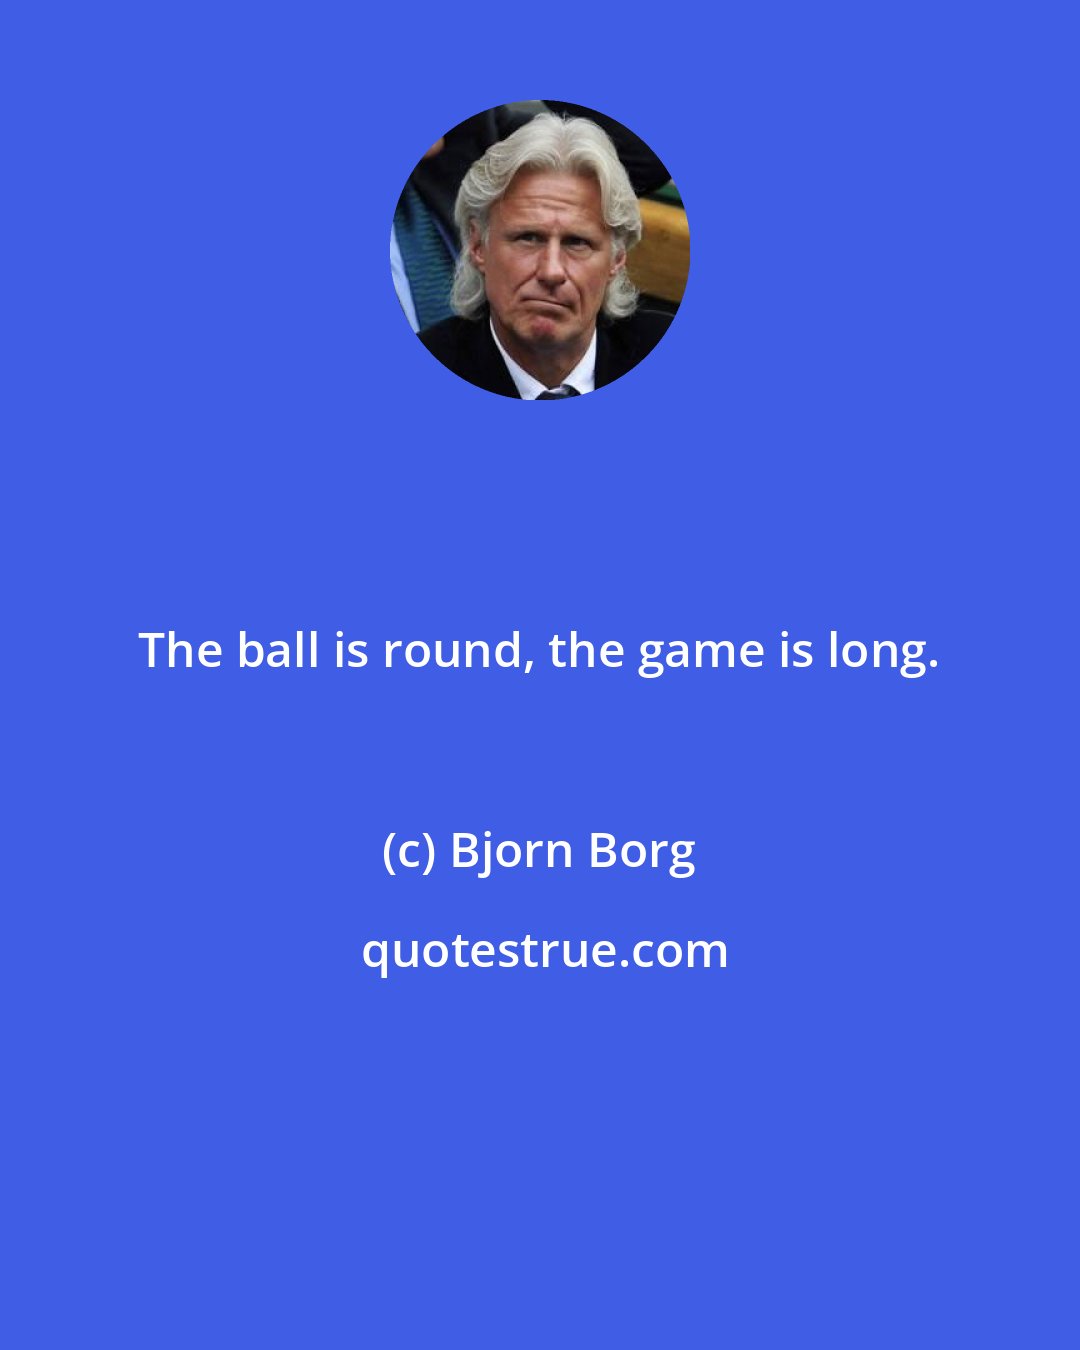 Bjorn Borg: The ball is round, the game is long.